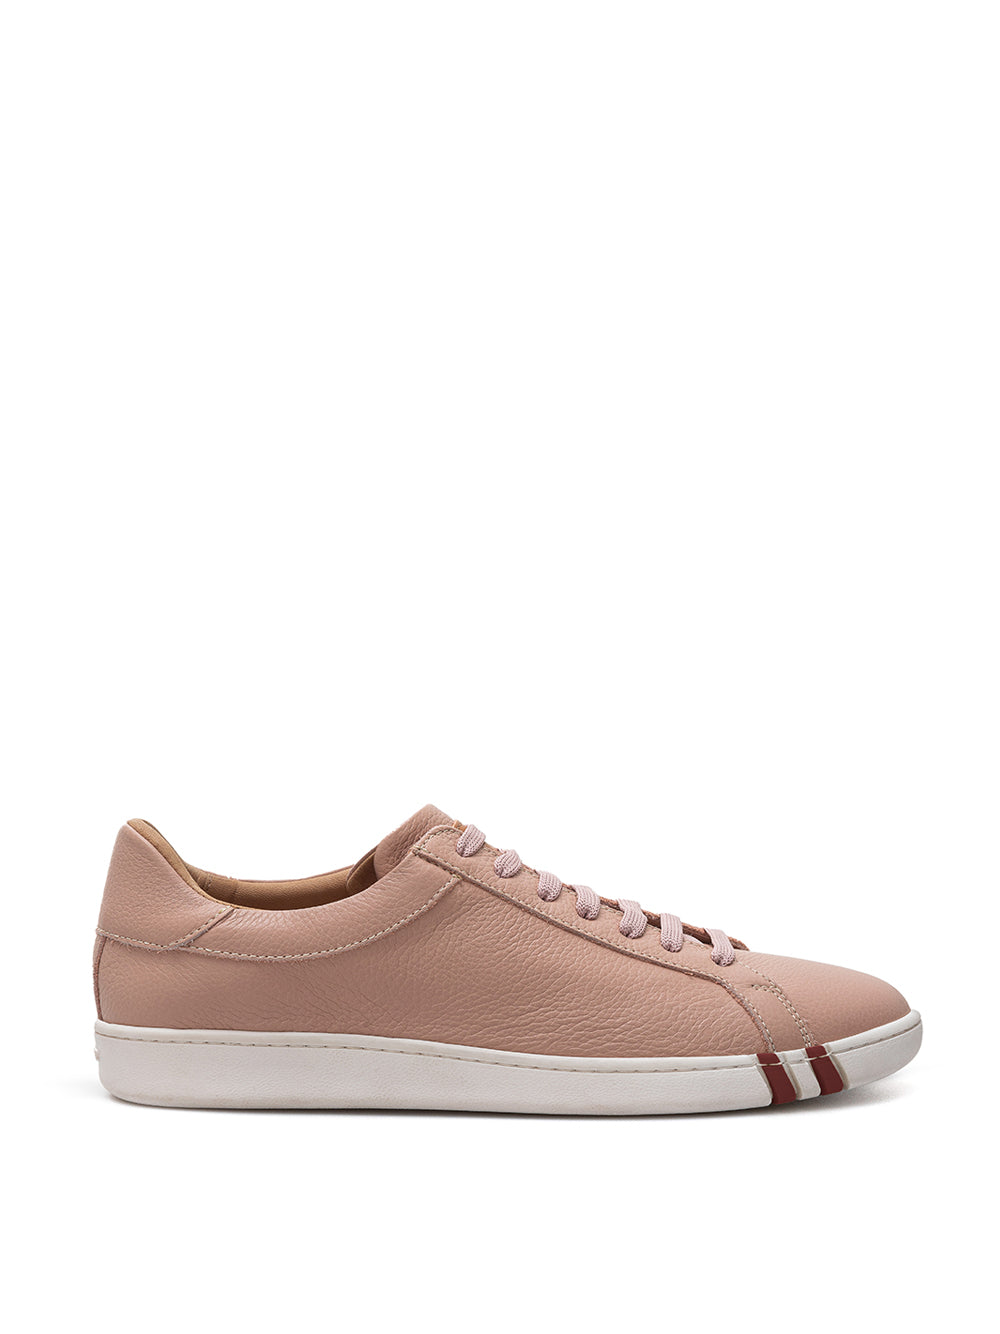 Bally Pink Leather Sneakers